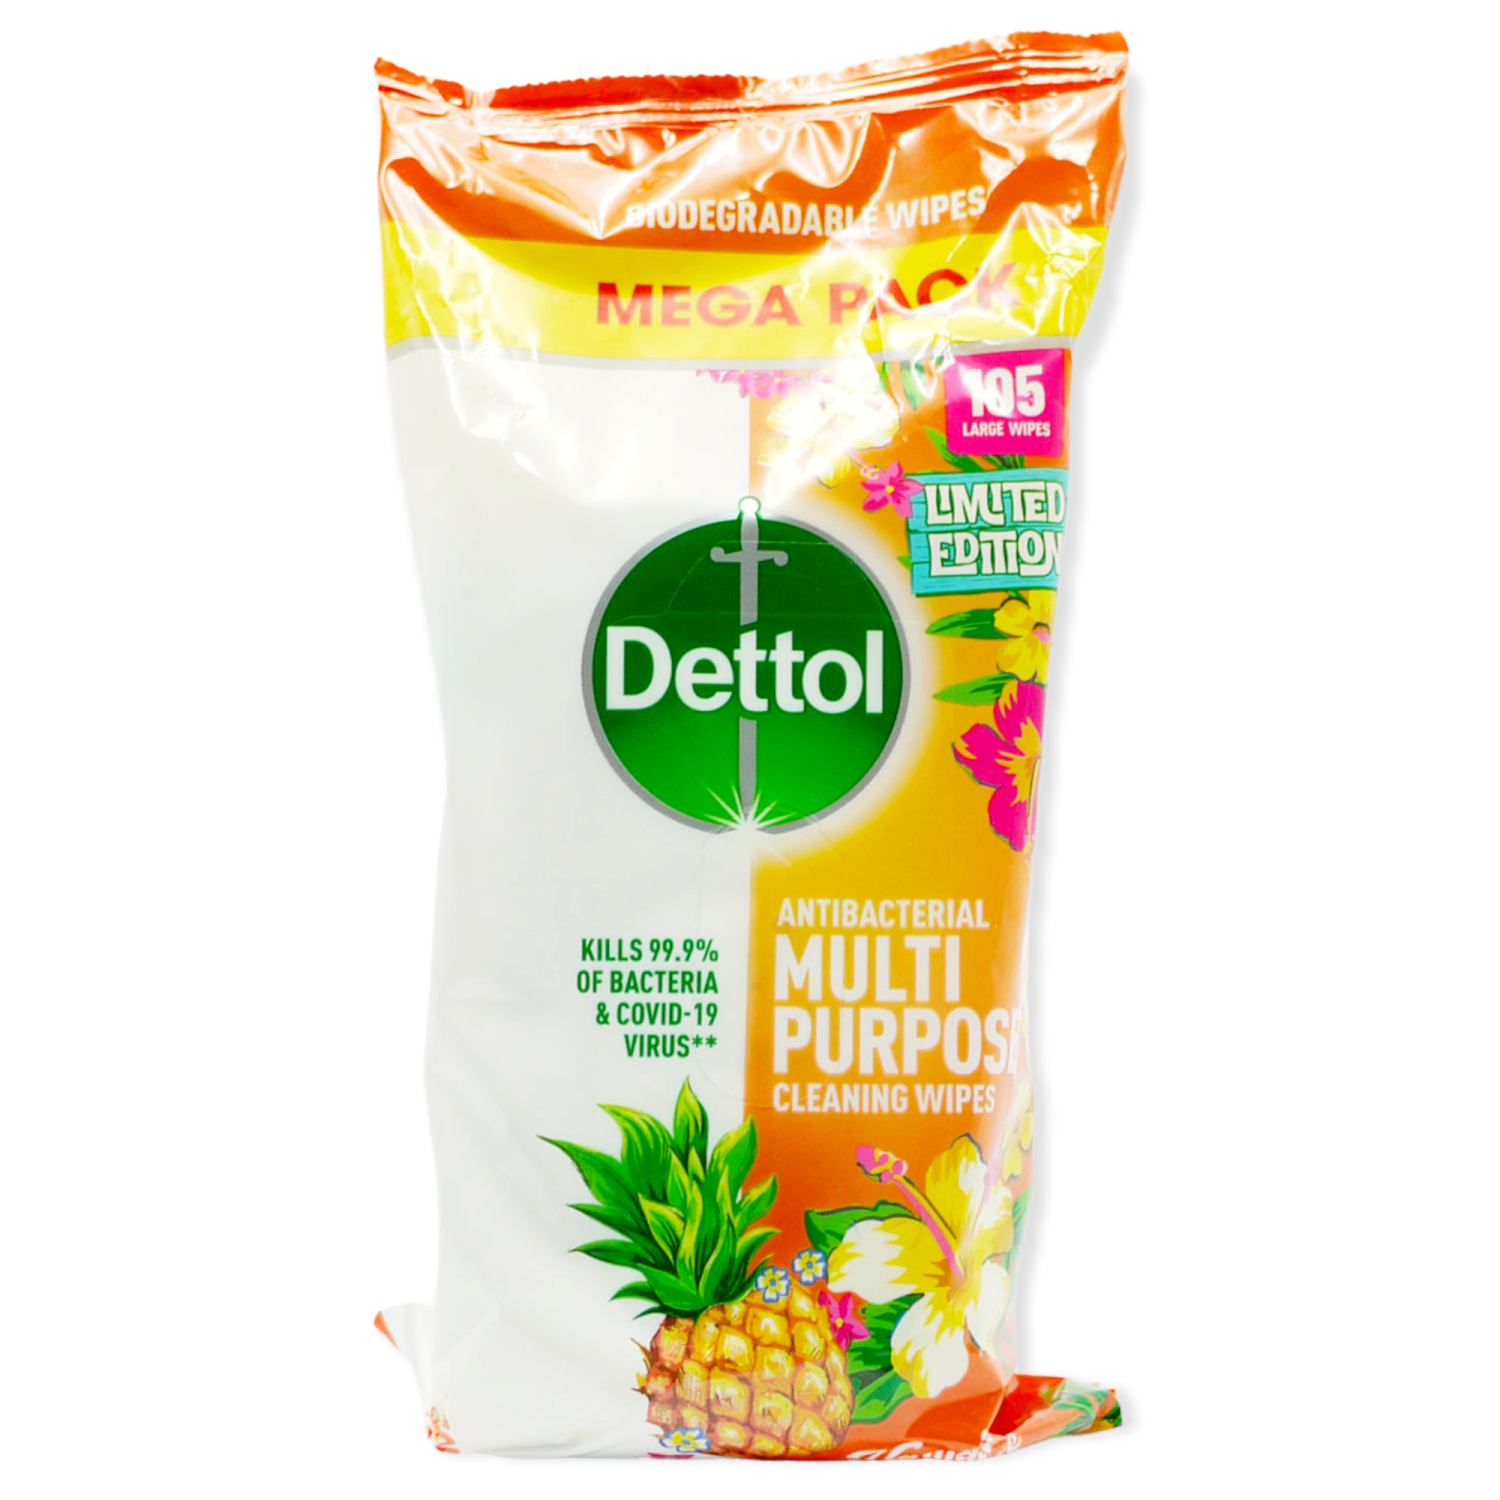 Dettol Tropical Anti Bacterial Multi Purpose Surface Wipes 105stk